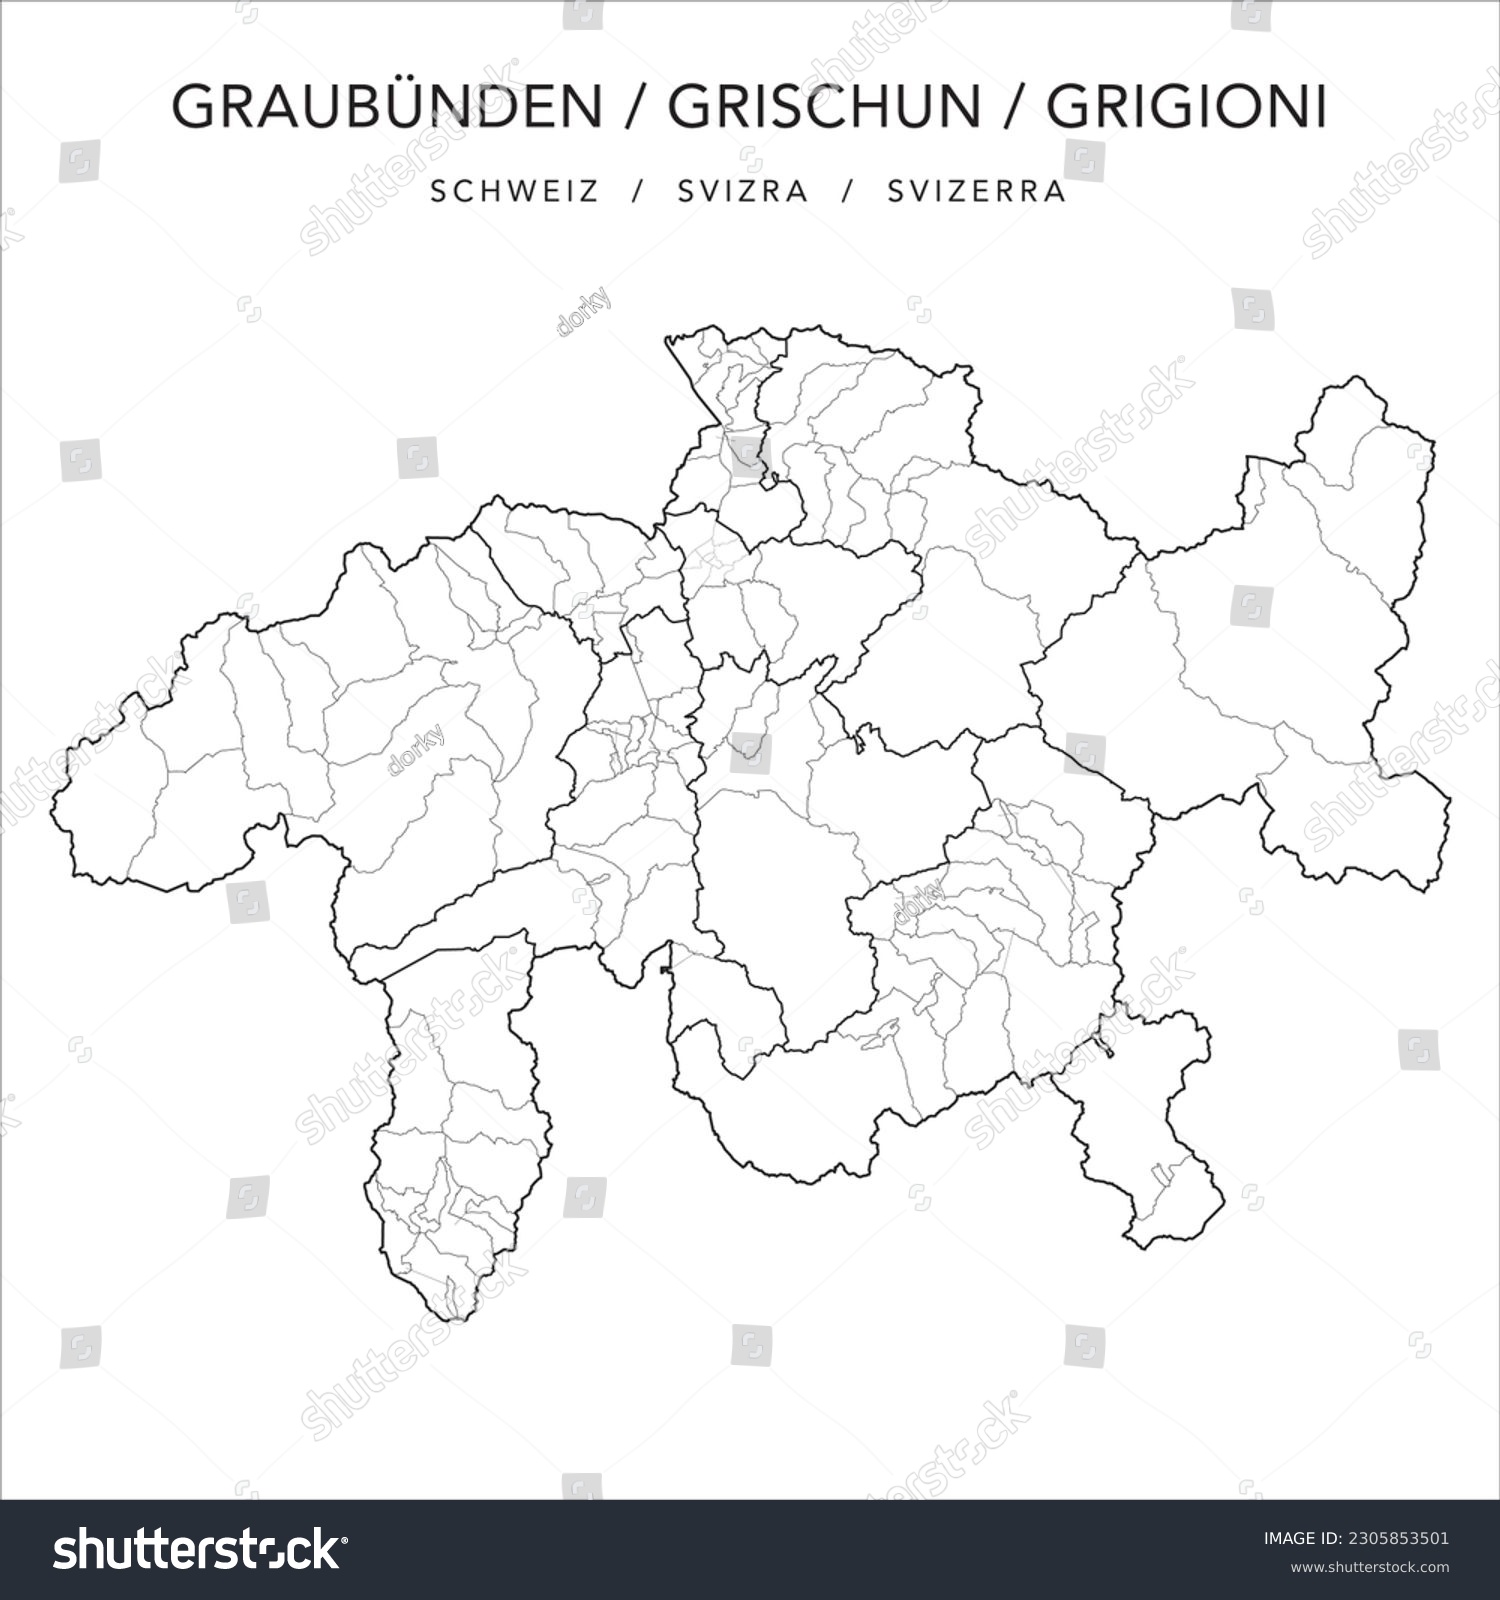 SVG of Vector Map of the Canton of the Grisons (Graubünden - Grischun - Grigioni) with the Administrative Borders of Regions, Municipalities and the Quarters of the City of Chur as of 2023 svg